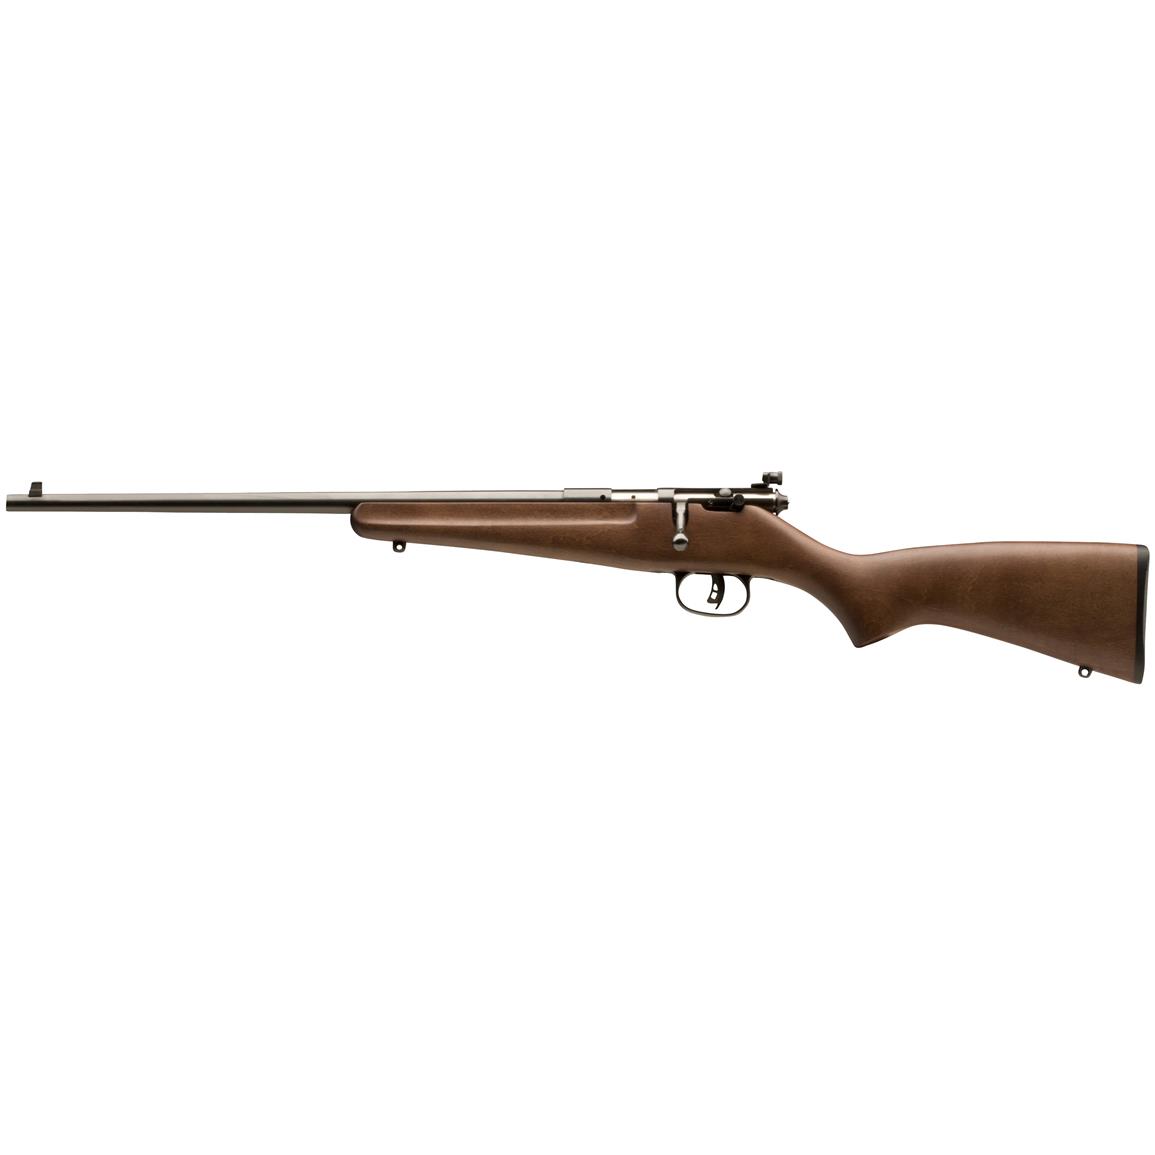 Savage Youth Rascal, Bolt Act, .22LR, Rimfire, 16.125" Barrel, 1 Round, Left Handed